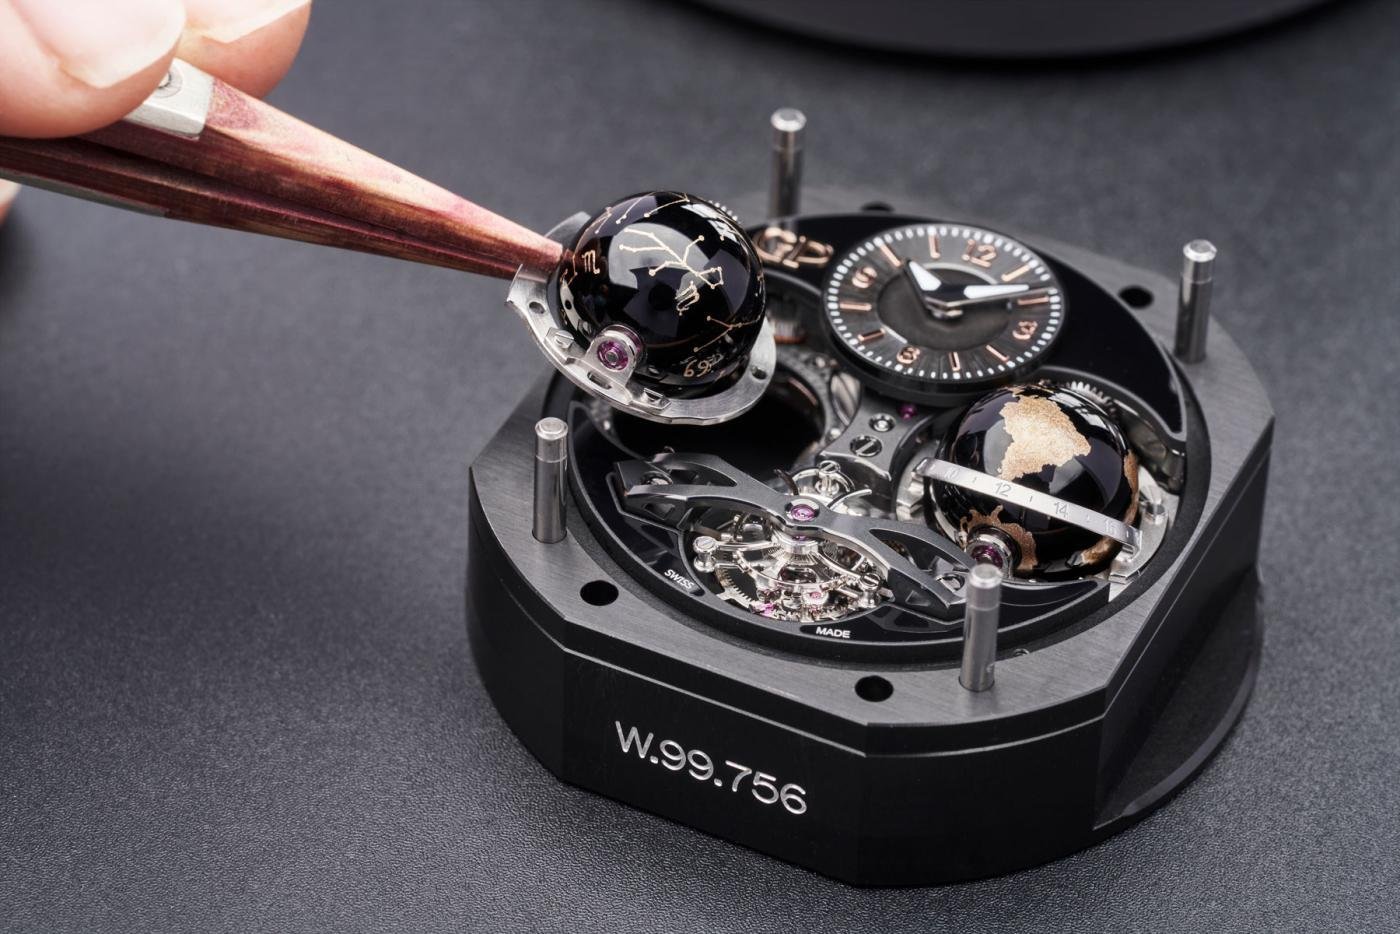 Reviving the Art of Watchmaking: An Interview with Tony Williams